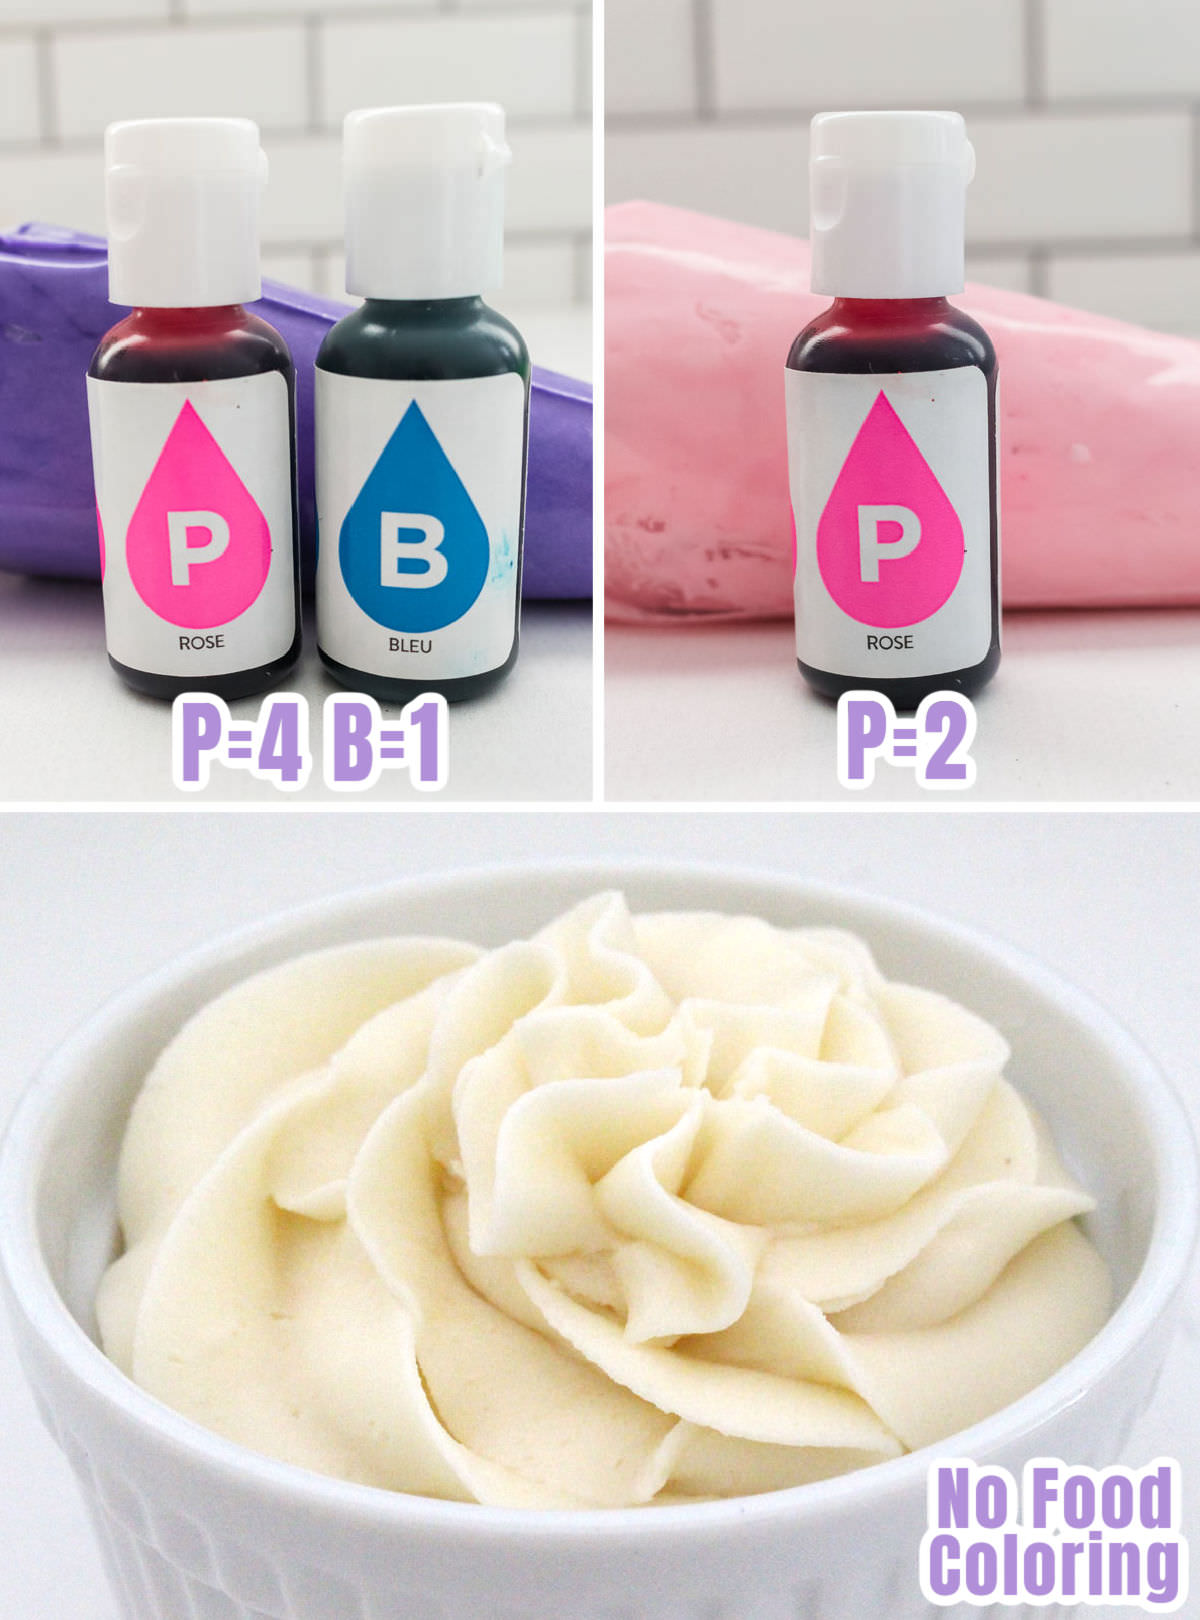 Collage image showing the food coloring formulas for tinting buttercream frosting Purple, Pink and White.